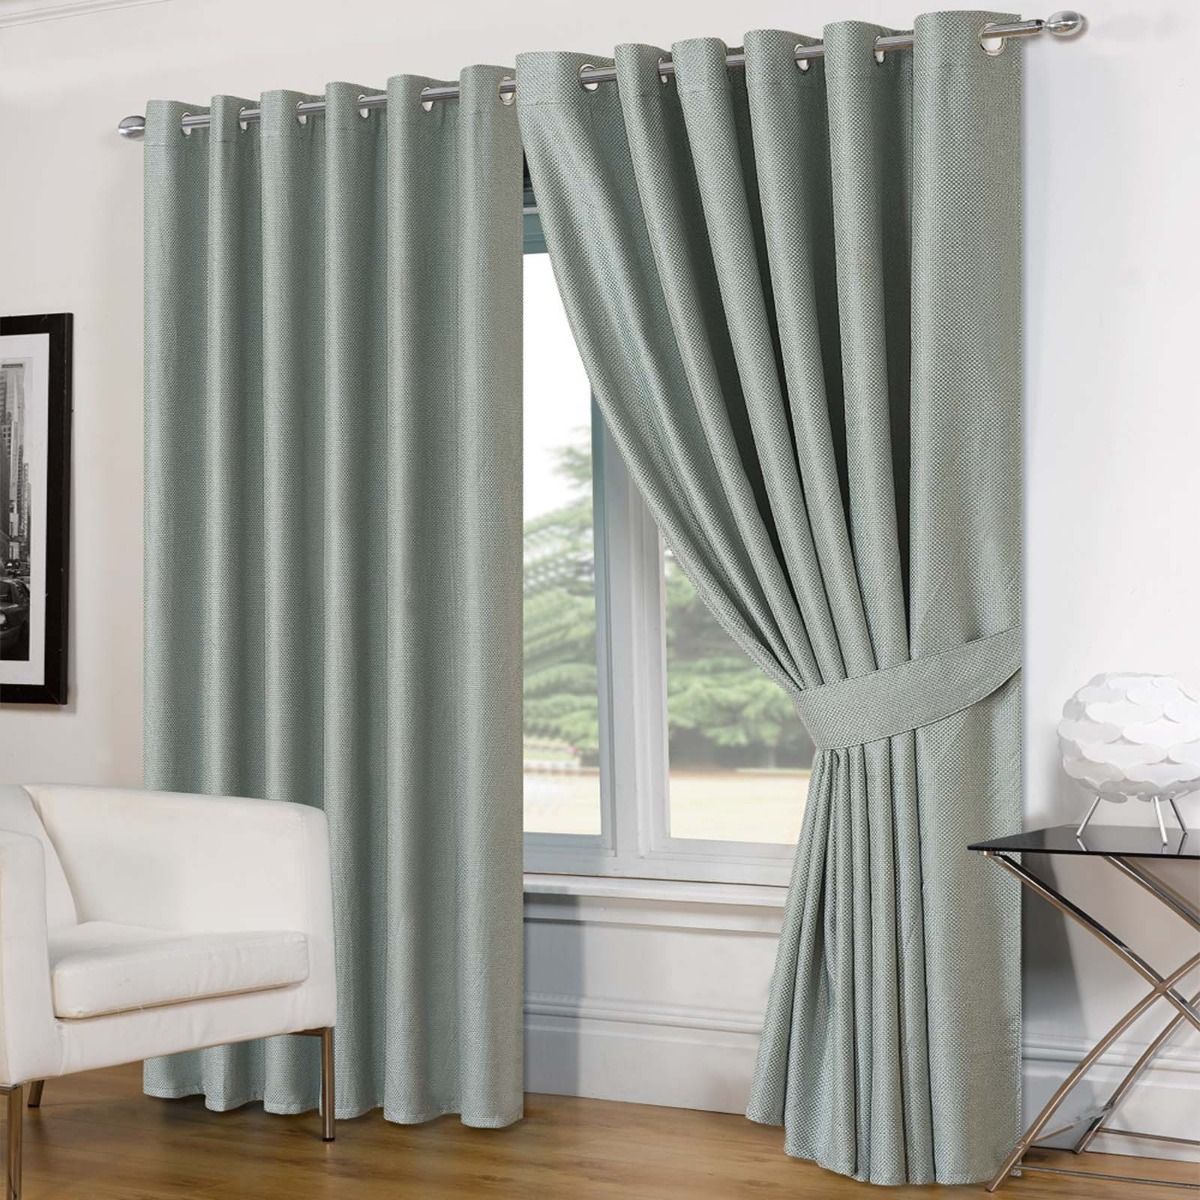 Luxury Basket Weave Lined  Eyelet Curtains with Tiebacks - Duck Egg 46"x54"